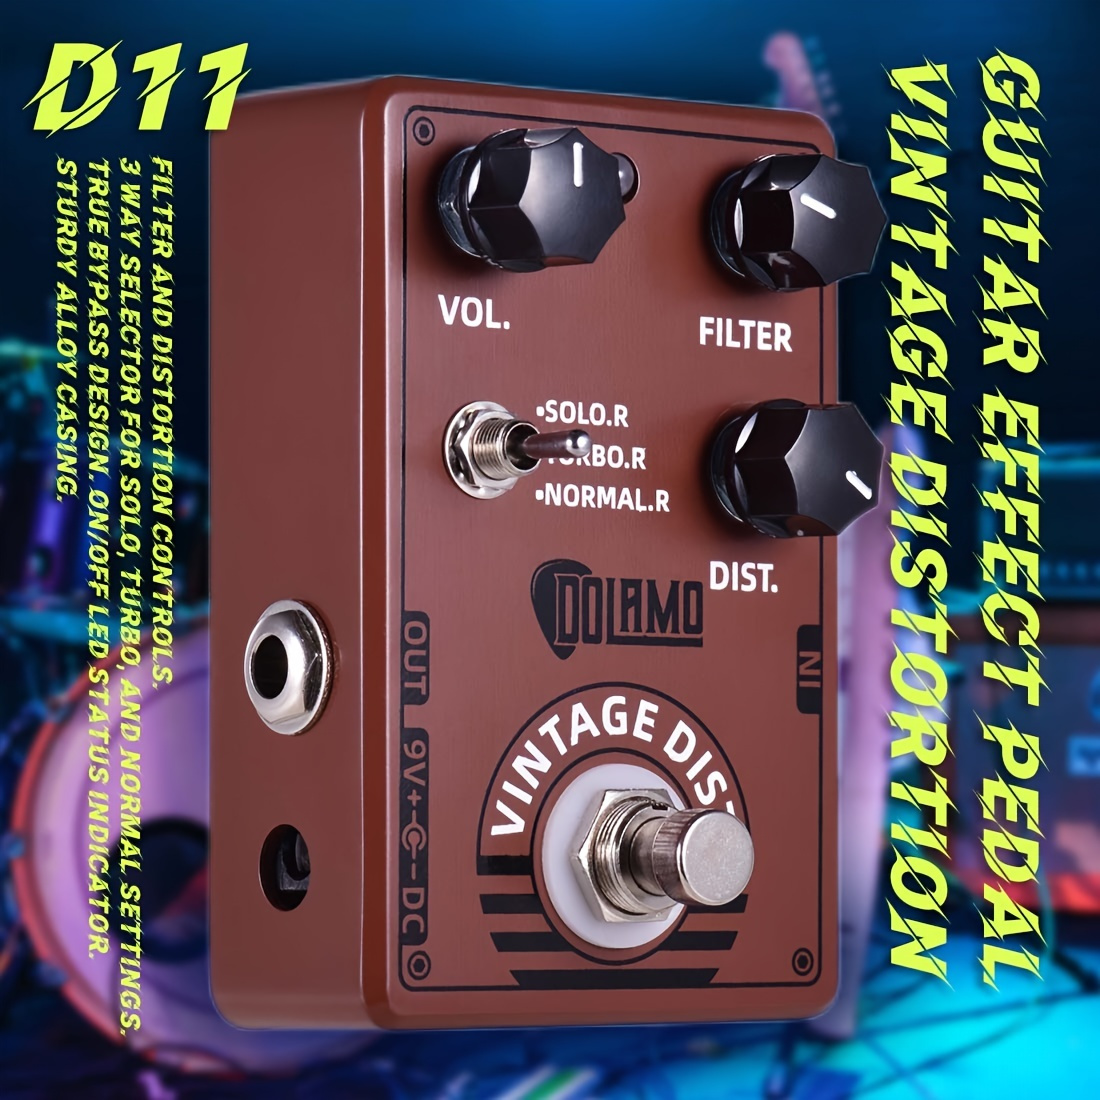 

1 Pc D-11 Vintage Distortion Guitar Effect Pedal With Filter And Distortion Controls True Bypass Design For Electric Guitar